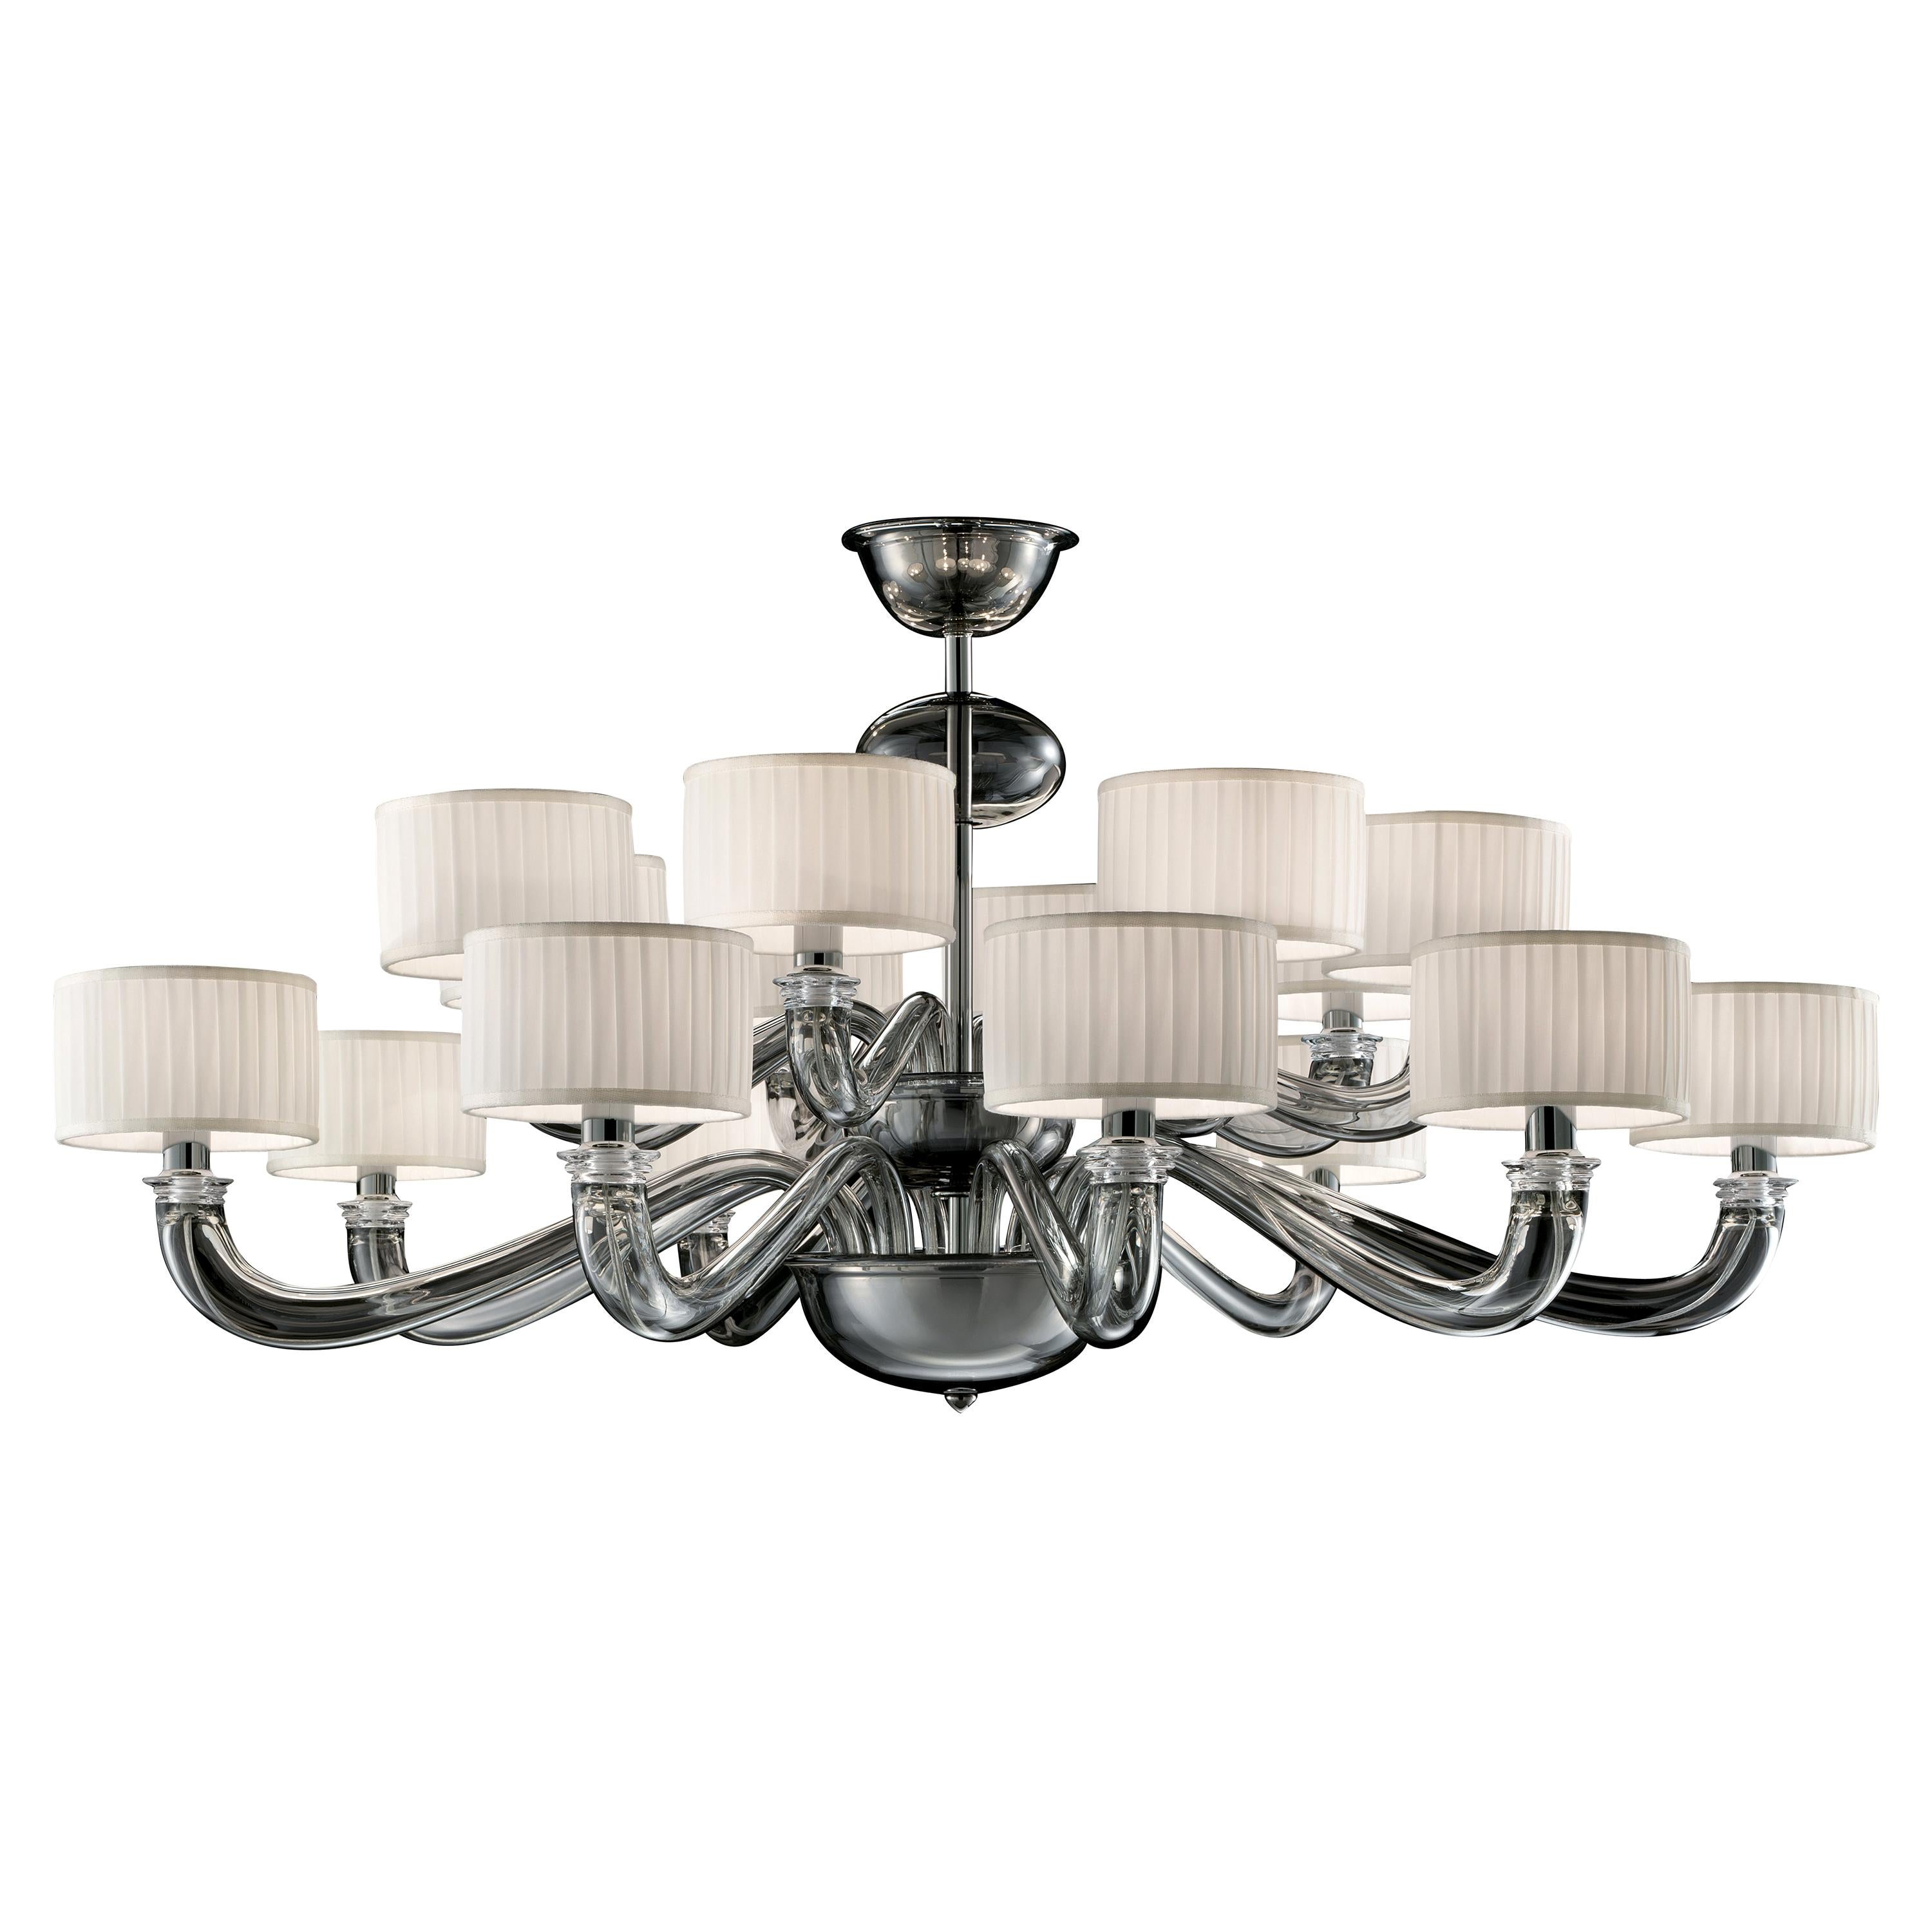 by chandelier 16 Sale in For Glass White Barovier&Toso Shade, 5597 Chandelier 1stDibs Alexandria alexandria | Customizable at with